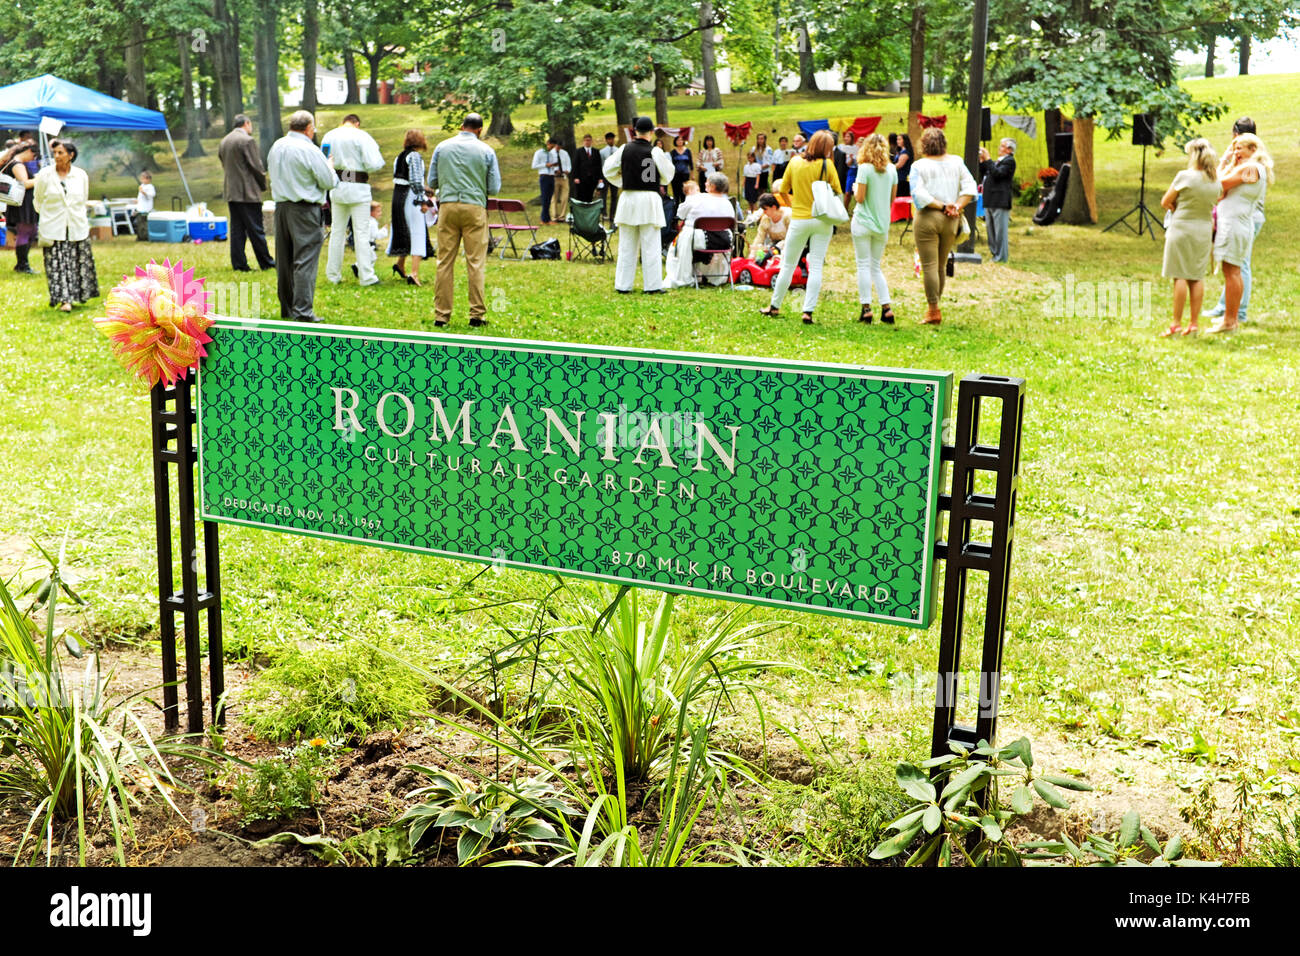 One World Day is celebrated annually in Rockefeller Park.  This Cleveland, Ohio event actively displays cultural ways in designated gardens. Stock Photo